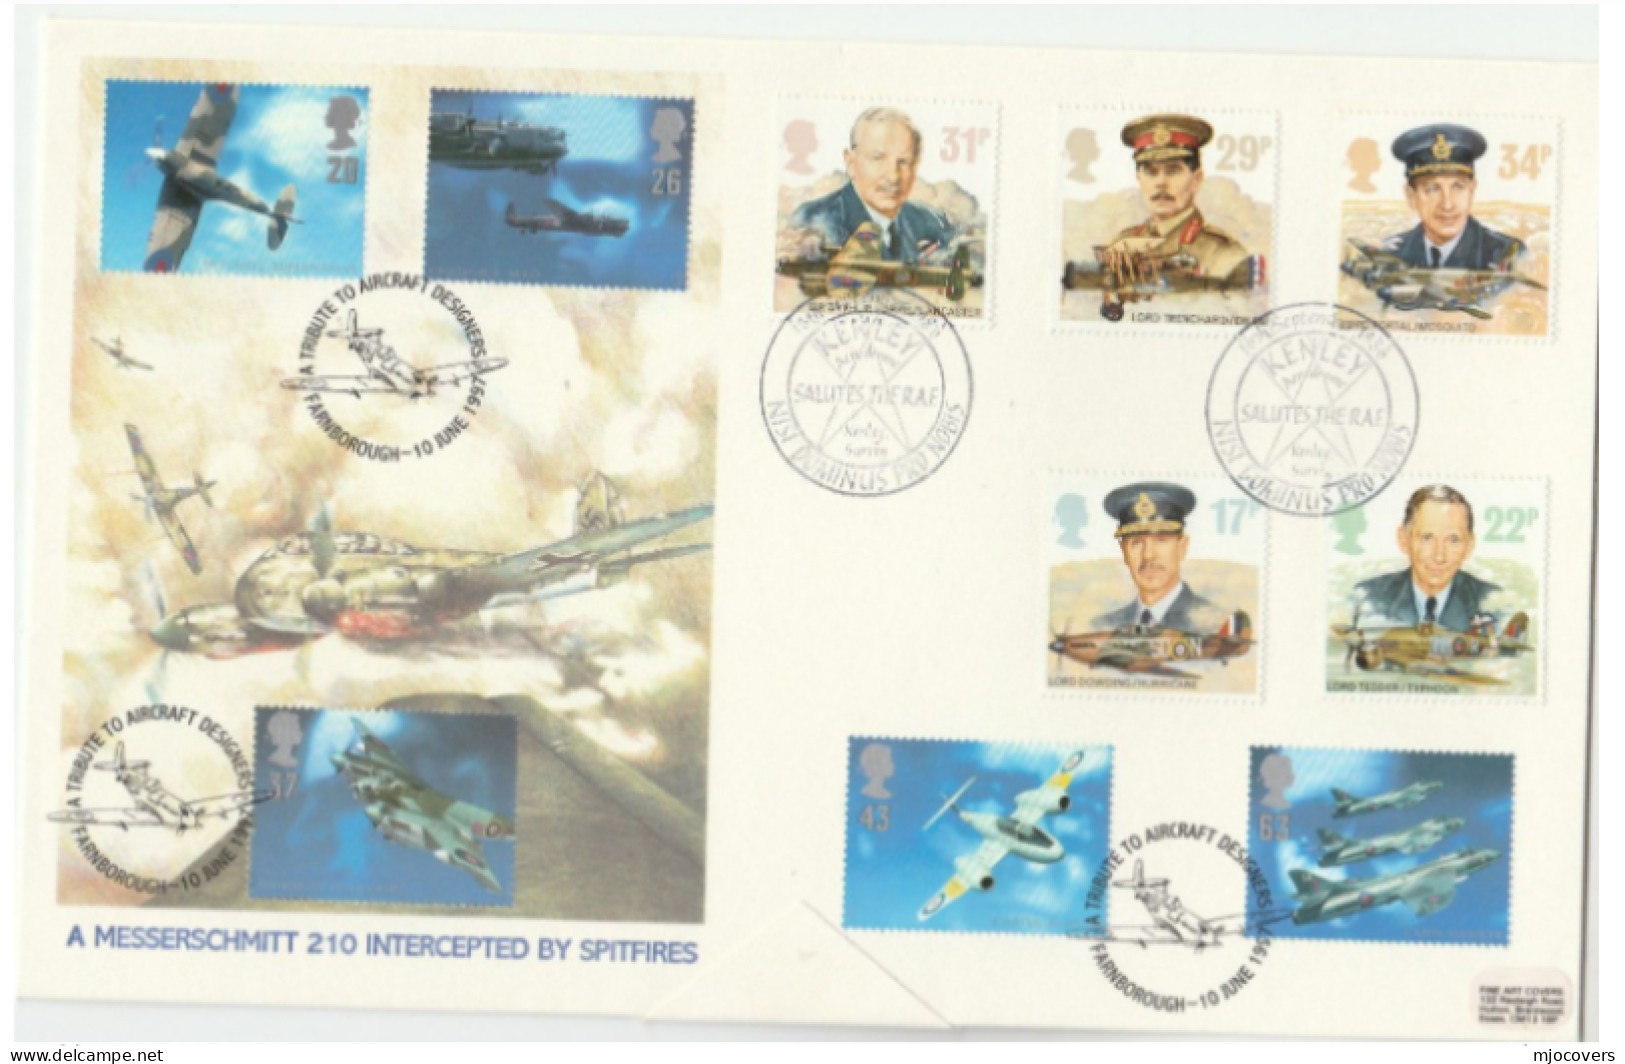 1 Single FDC Franked 10 Diff Stamp WWII Aircraft Designers RAF Aviation Cover Ilus Messerschmitt Spitfire GB Specal Pmks - Aviones